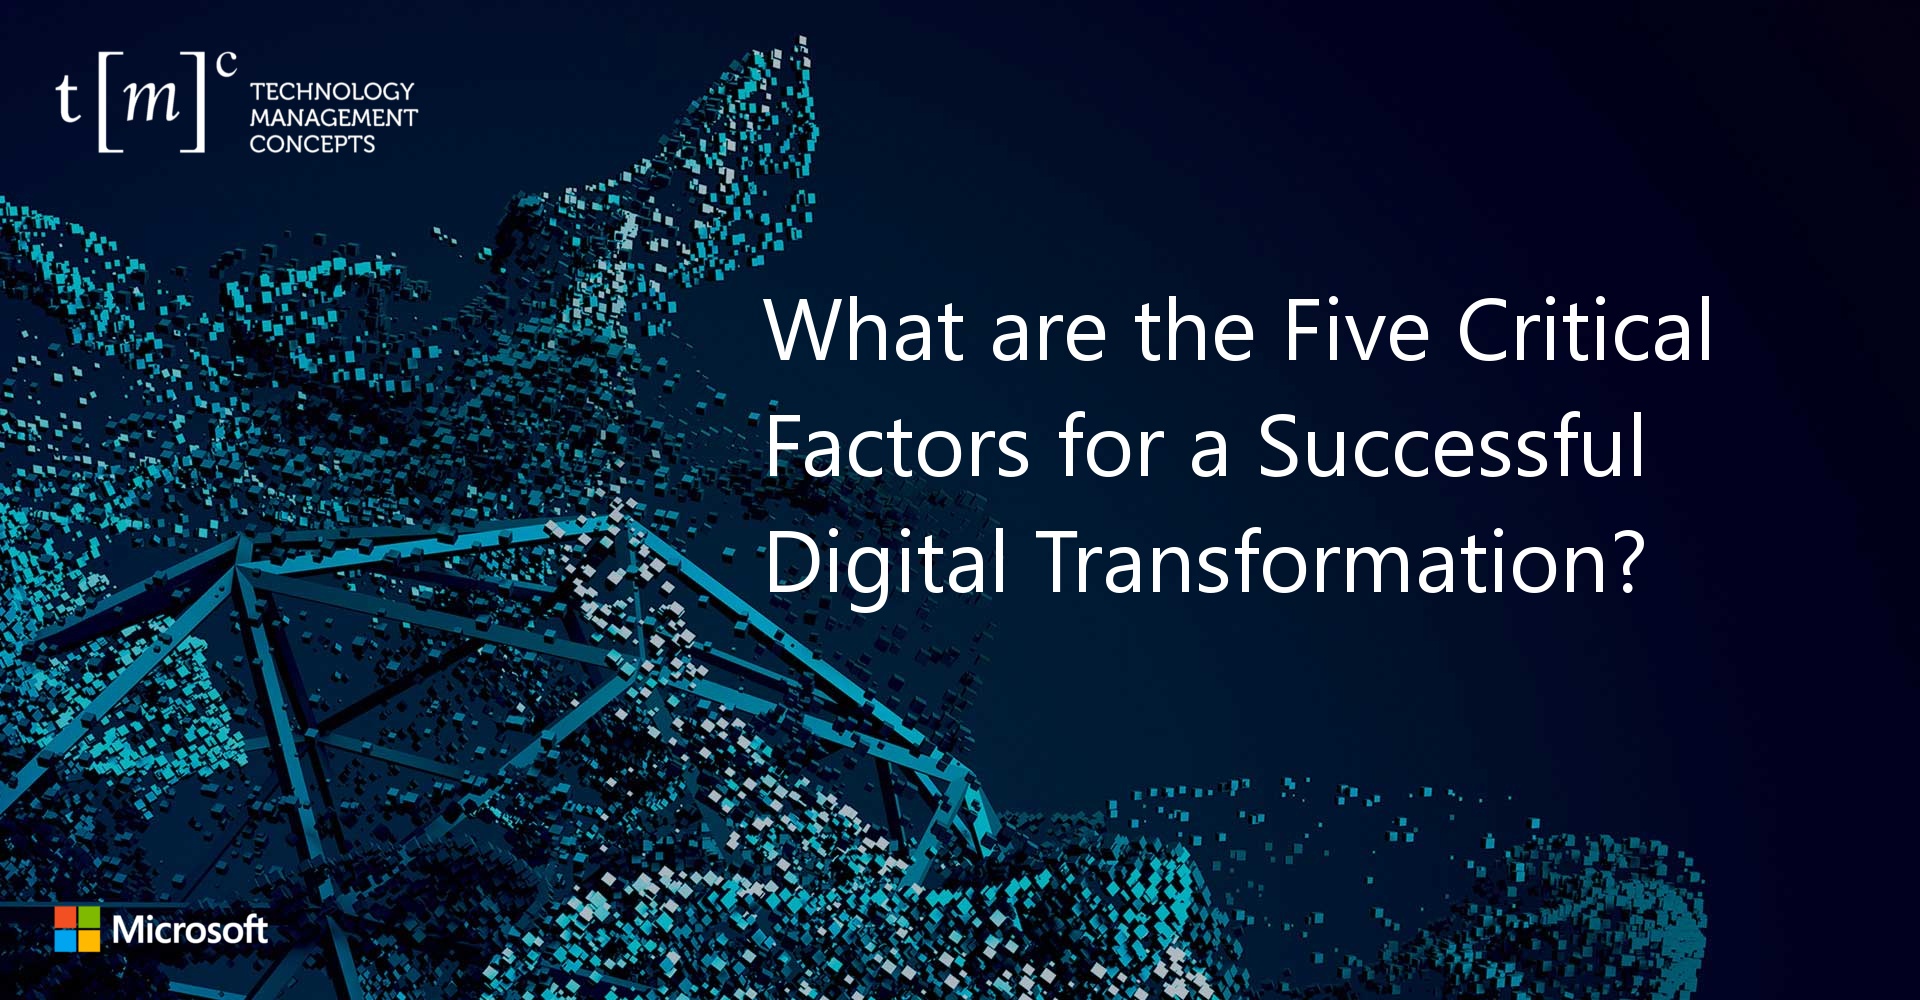 The-Five-Critical-Factors-for-a-Successful-Digital-Transformation-featured-image